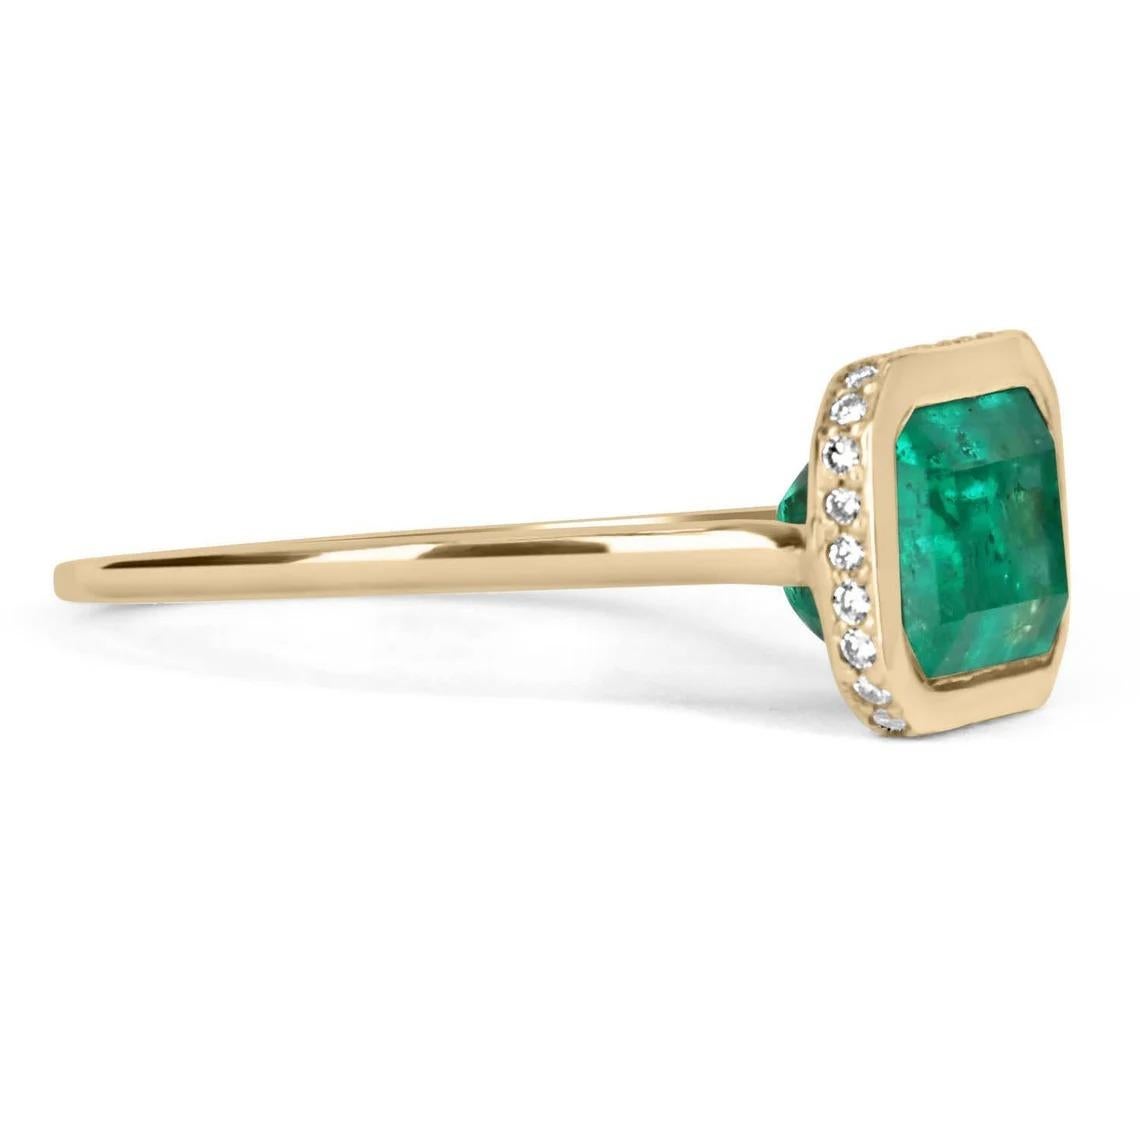 Showcased is a modern, emerald, and diamond accent solitaire ring. This solitaire carries a full 3.62-carat natural emerald cut-Colombian emerald. This gemstone is fully faceted and has an excellent shine. Diamonds accent the ring from the side